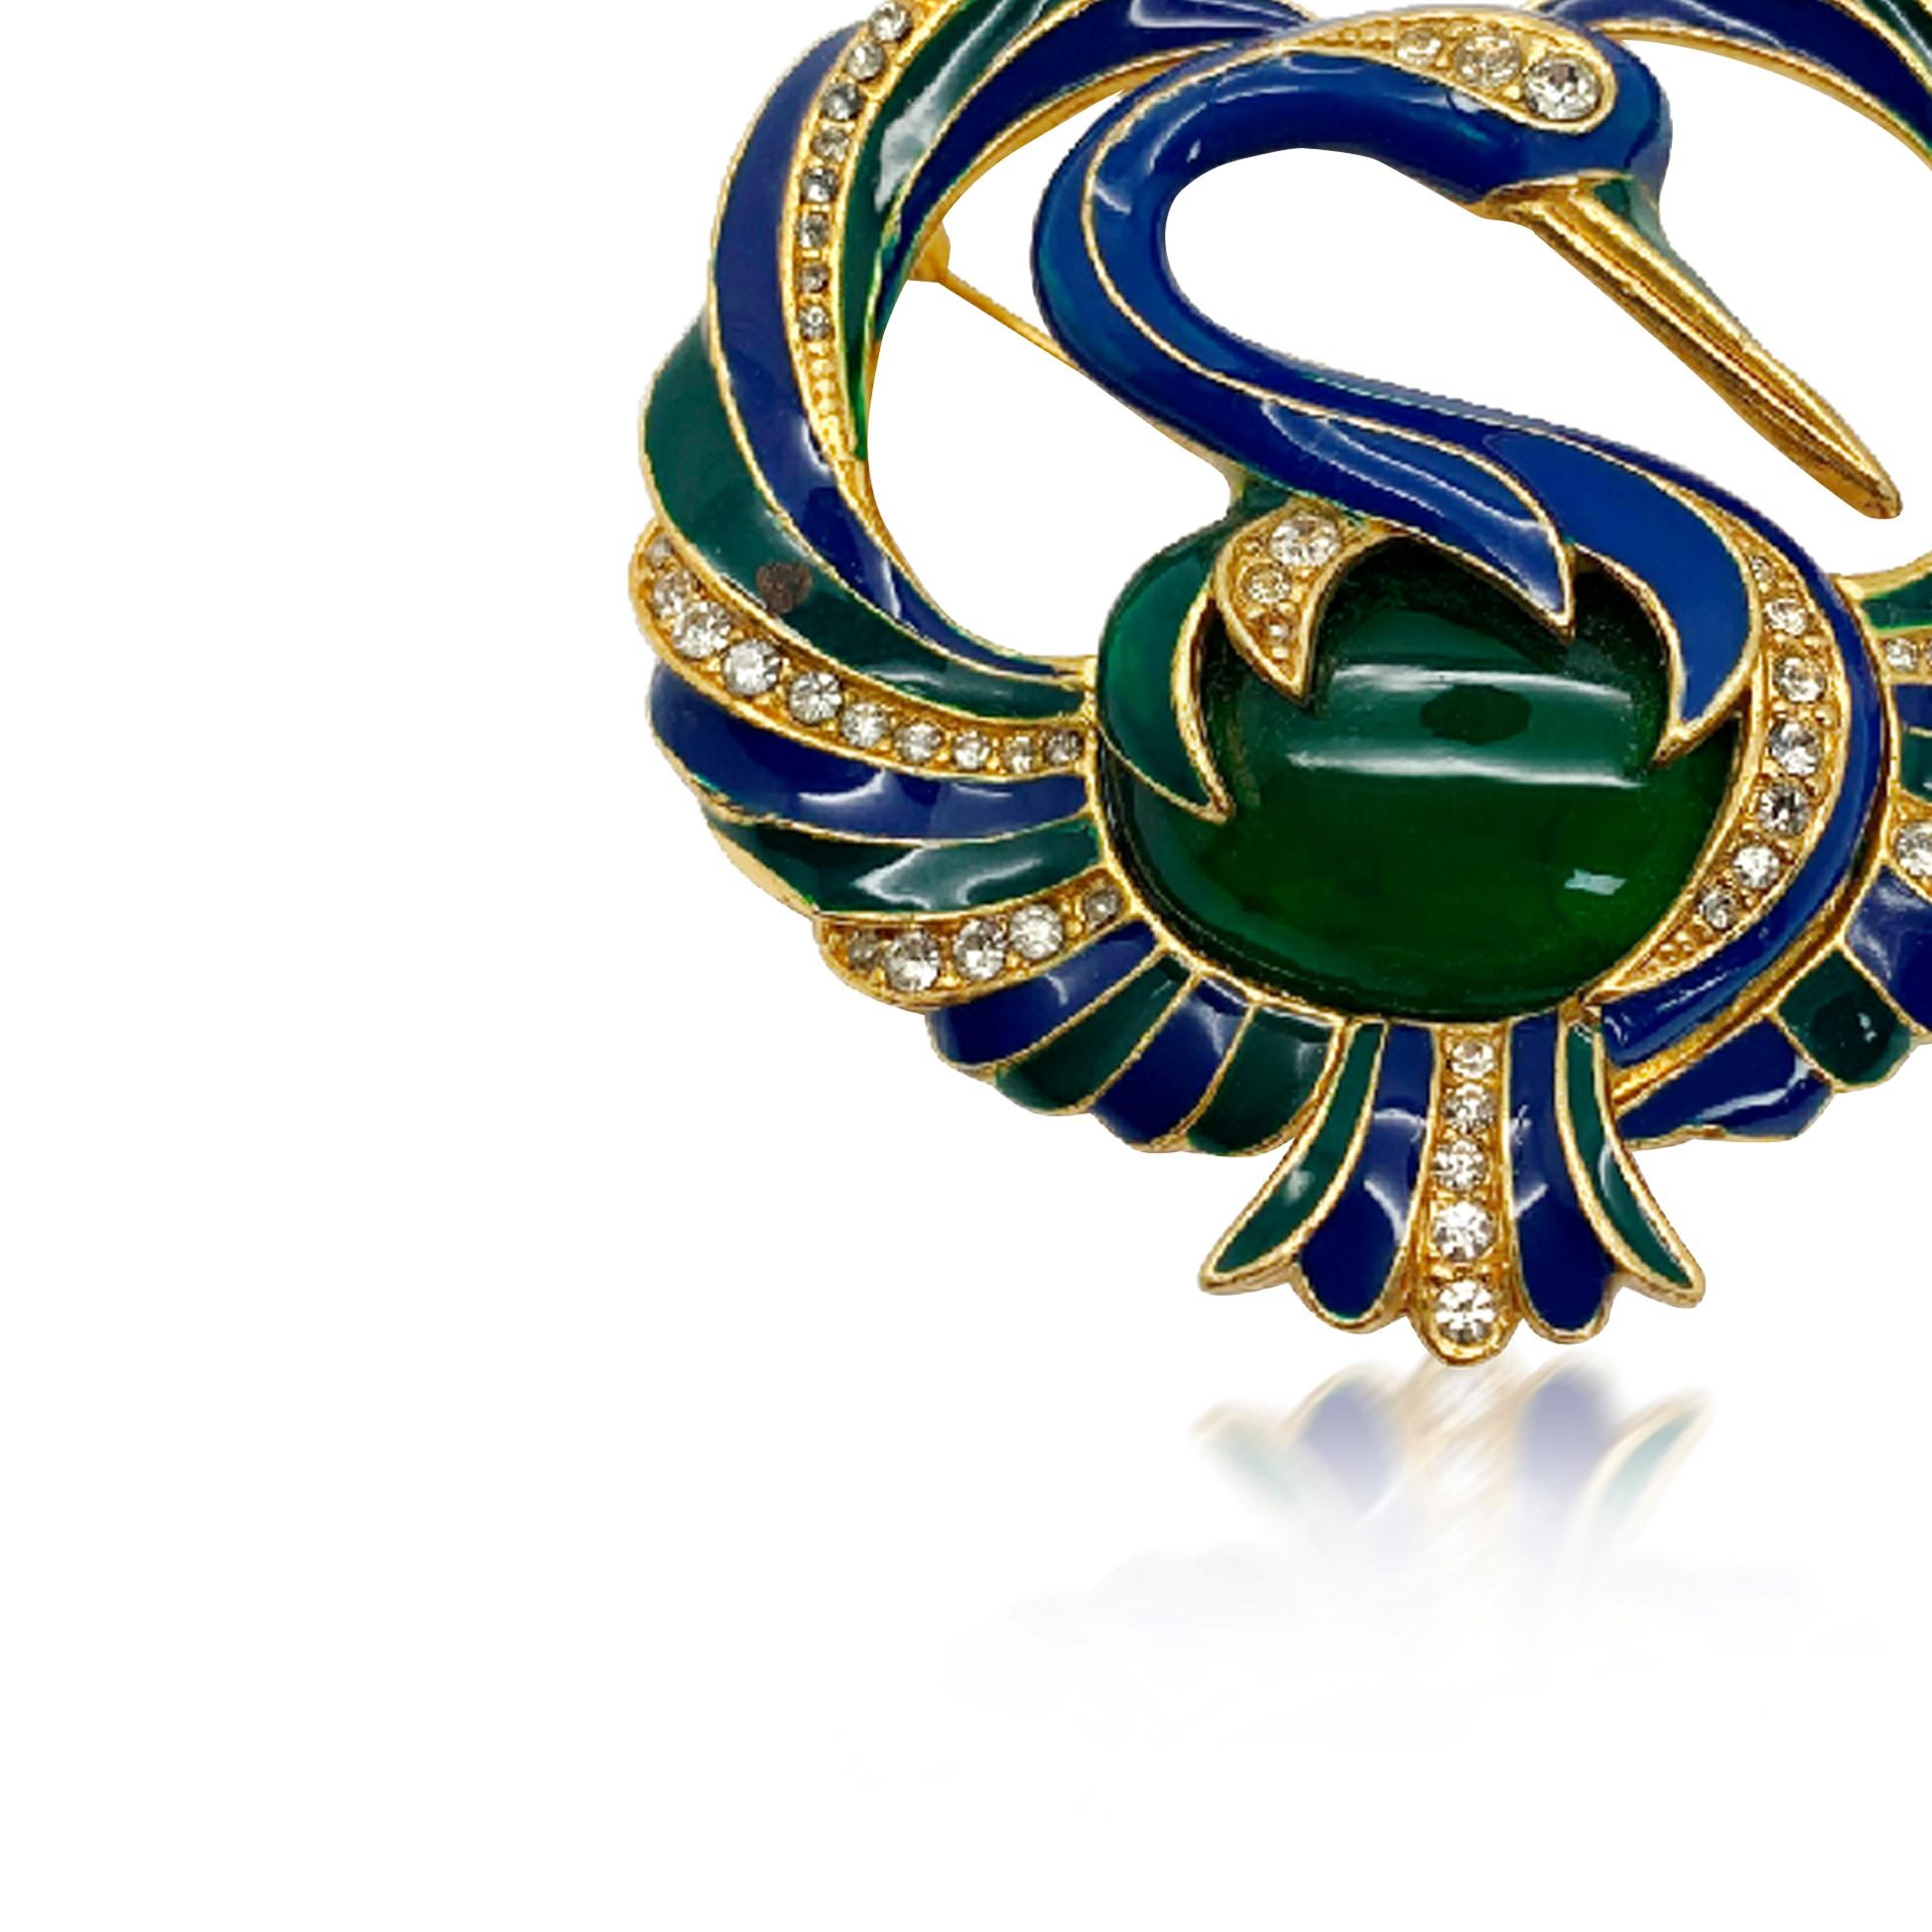 A Vintage cabochon bird brooch. Featuring sumptuous green and blue enamel detailing and a large oval cabochon stone for the belly. 
Vintage Condition: Very good without damage or noteworthy wear. 
Materials: Gold plated metal, glass, enamel
Signed: